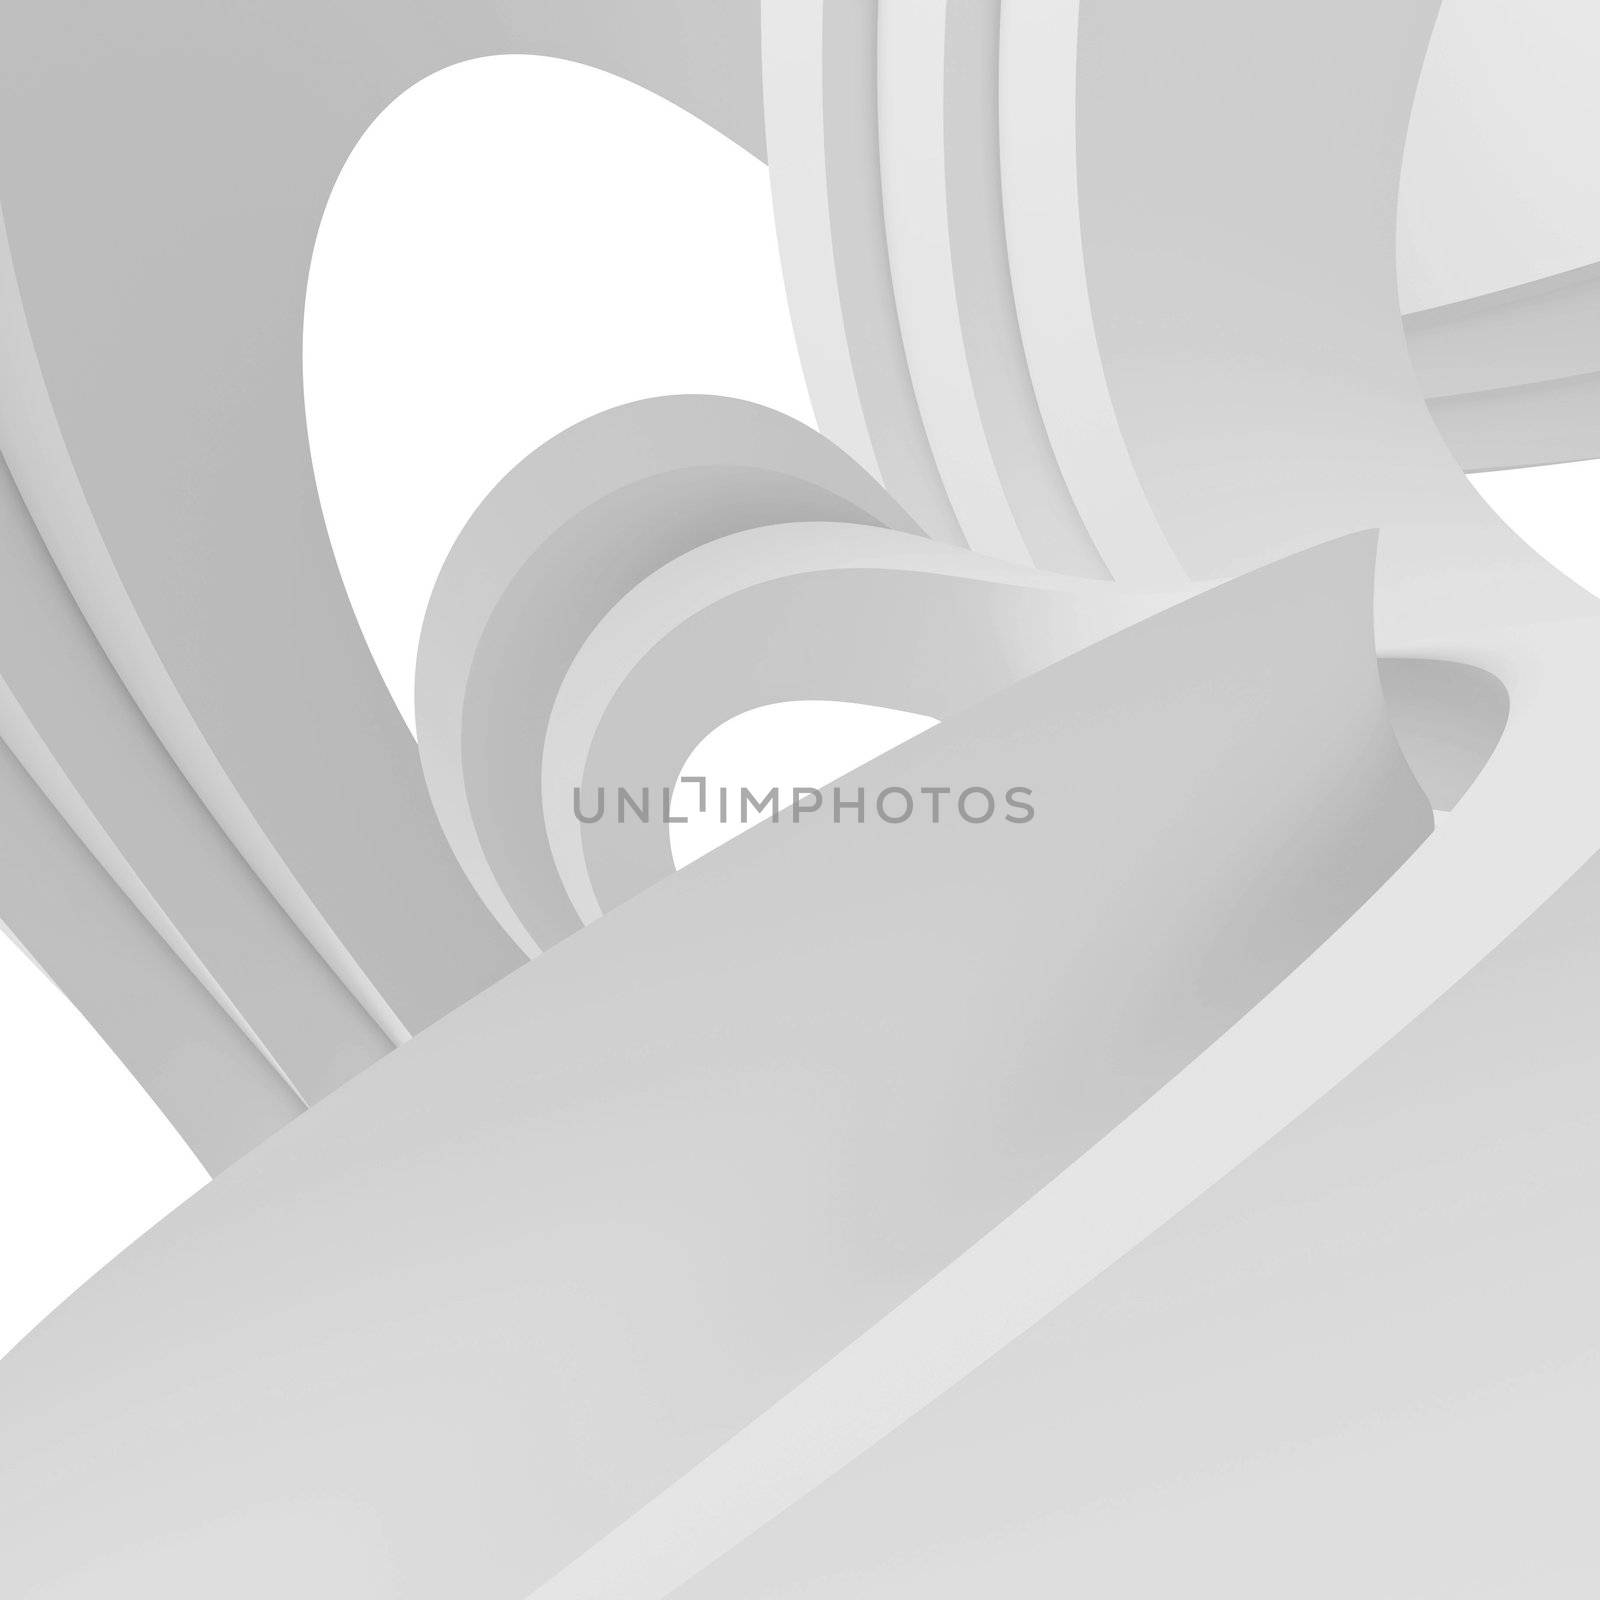 3d Illustration of Abstract Geometric Wallpaper or Background